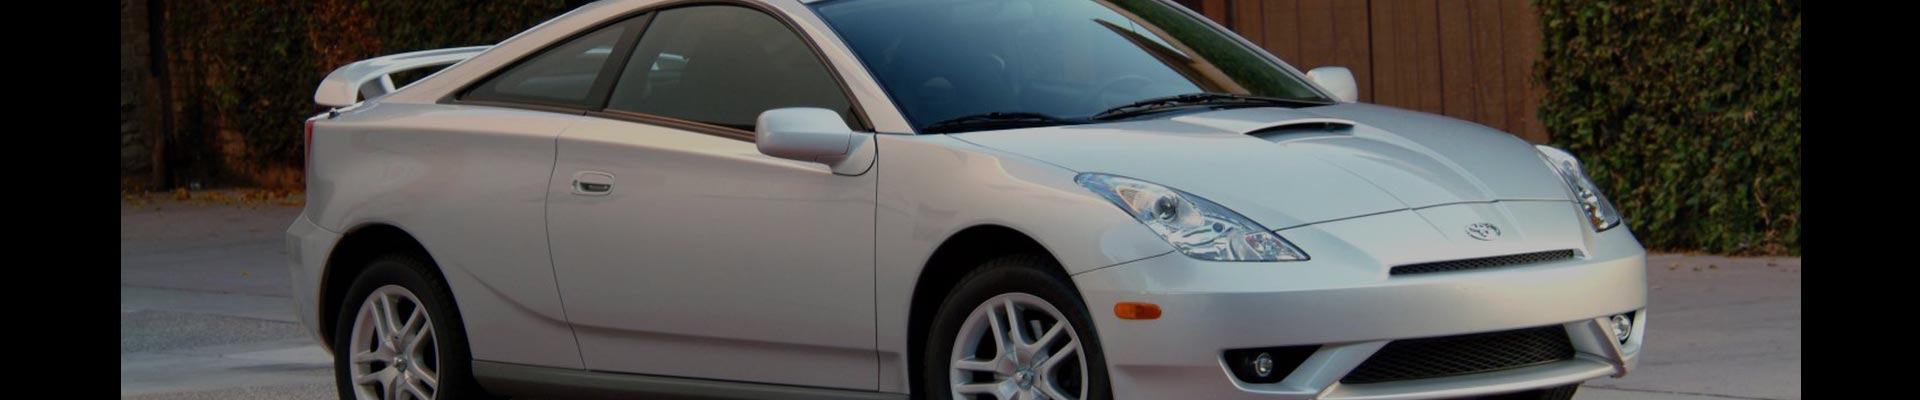 Shop Replacement and OEM 2000 Toyota Celica Parts with Discounted Price on the Net